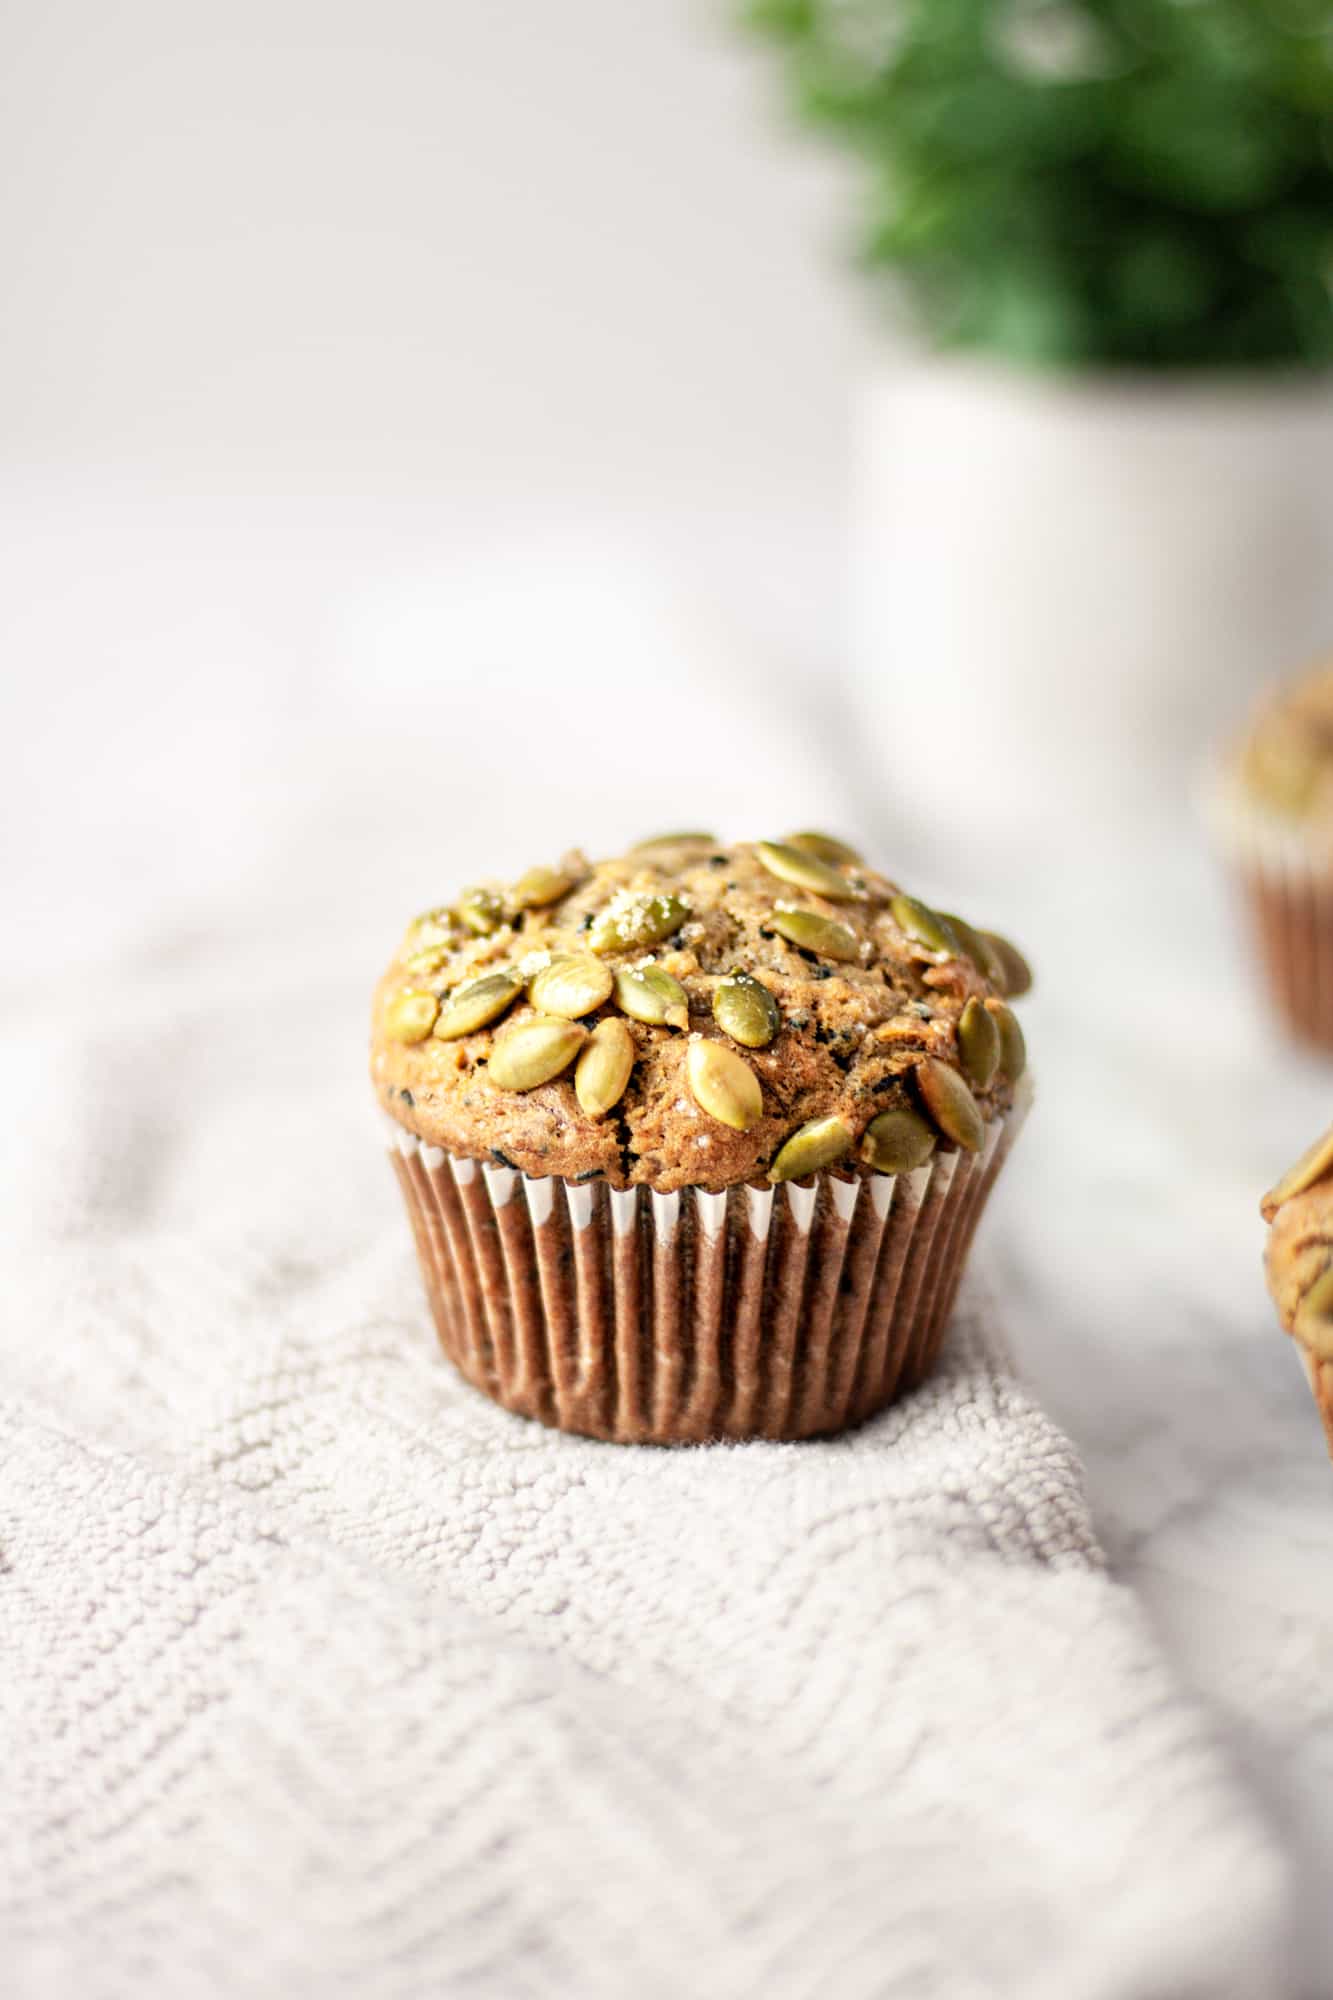 Up close view of a black sesame muffin with pumpkin seeds and turbinado sugar on top